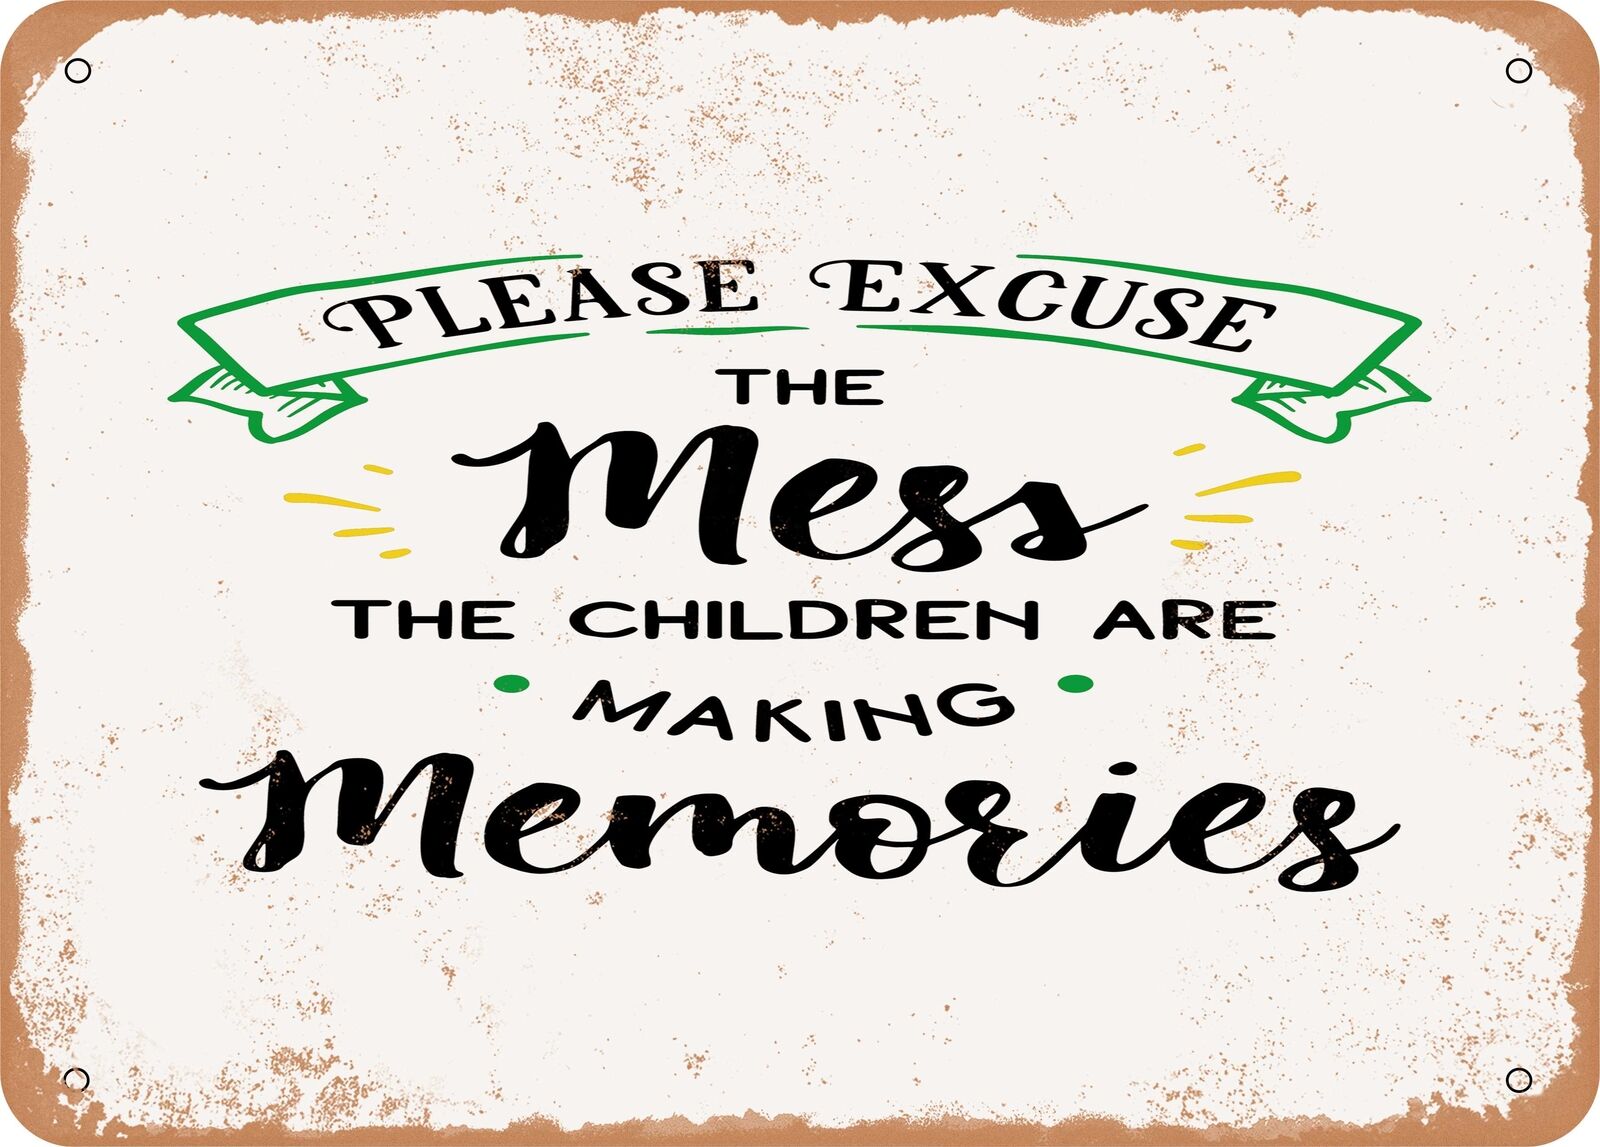 Metal Sign - Please Excuse the Mess the Children Are - Vintage Look Sign